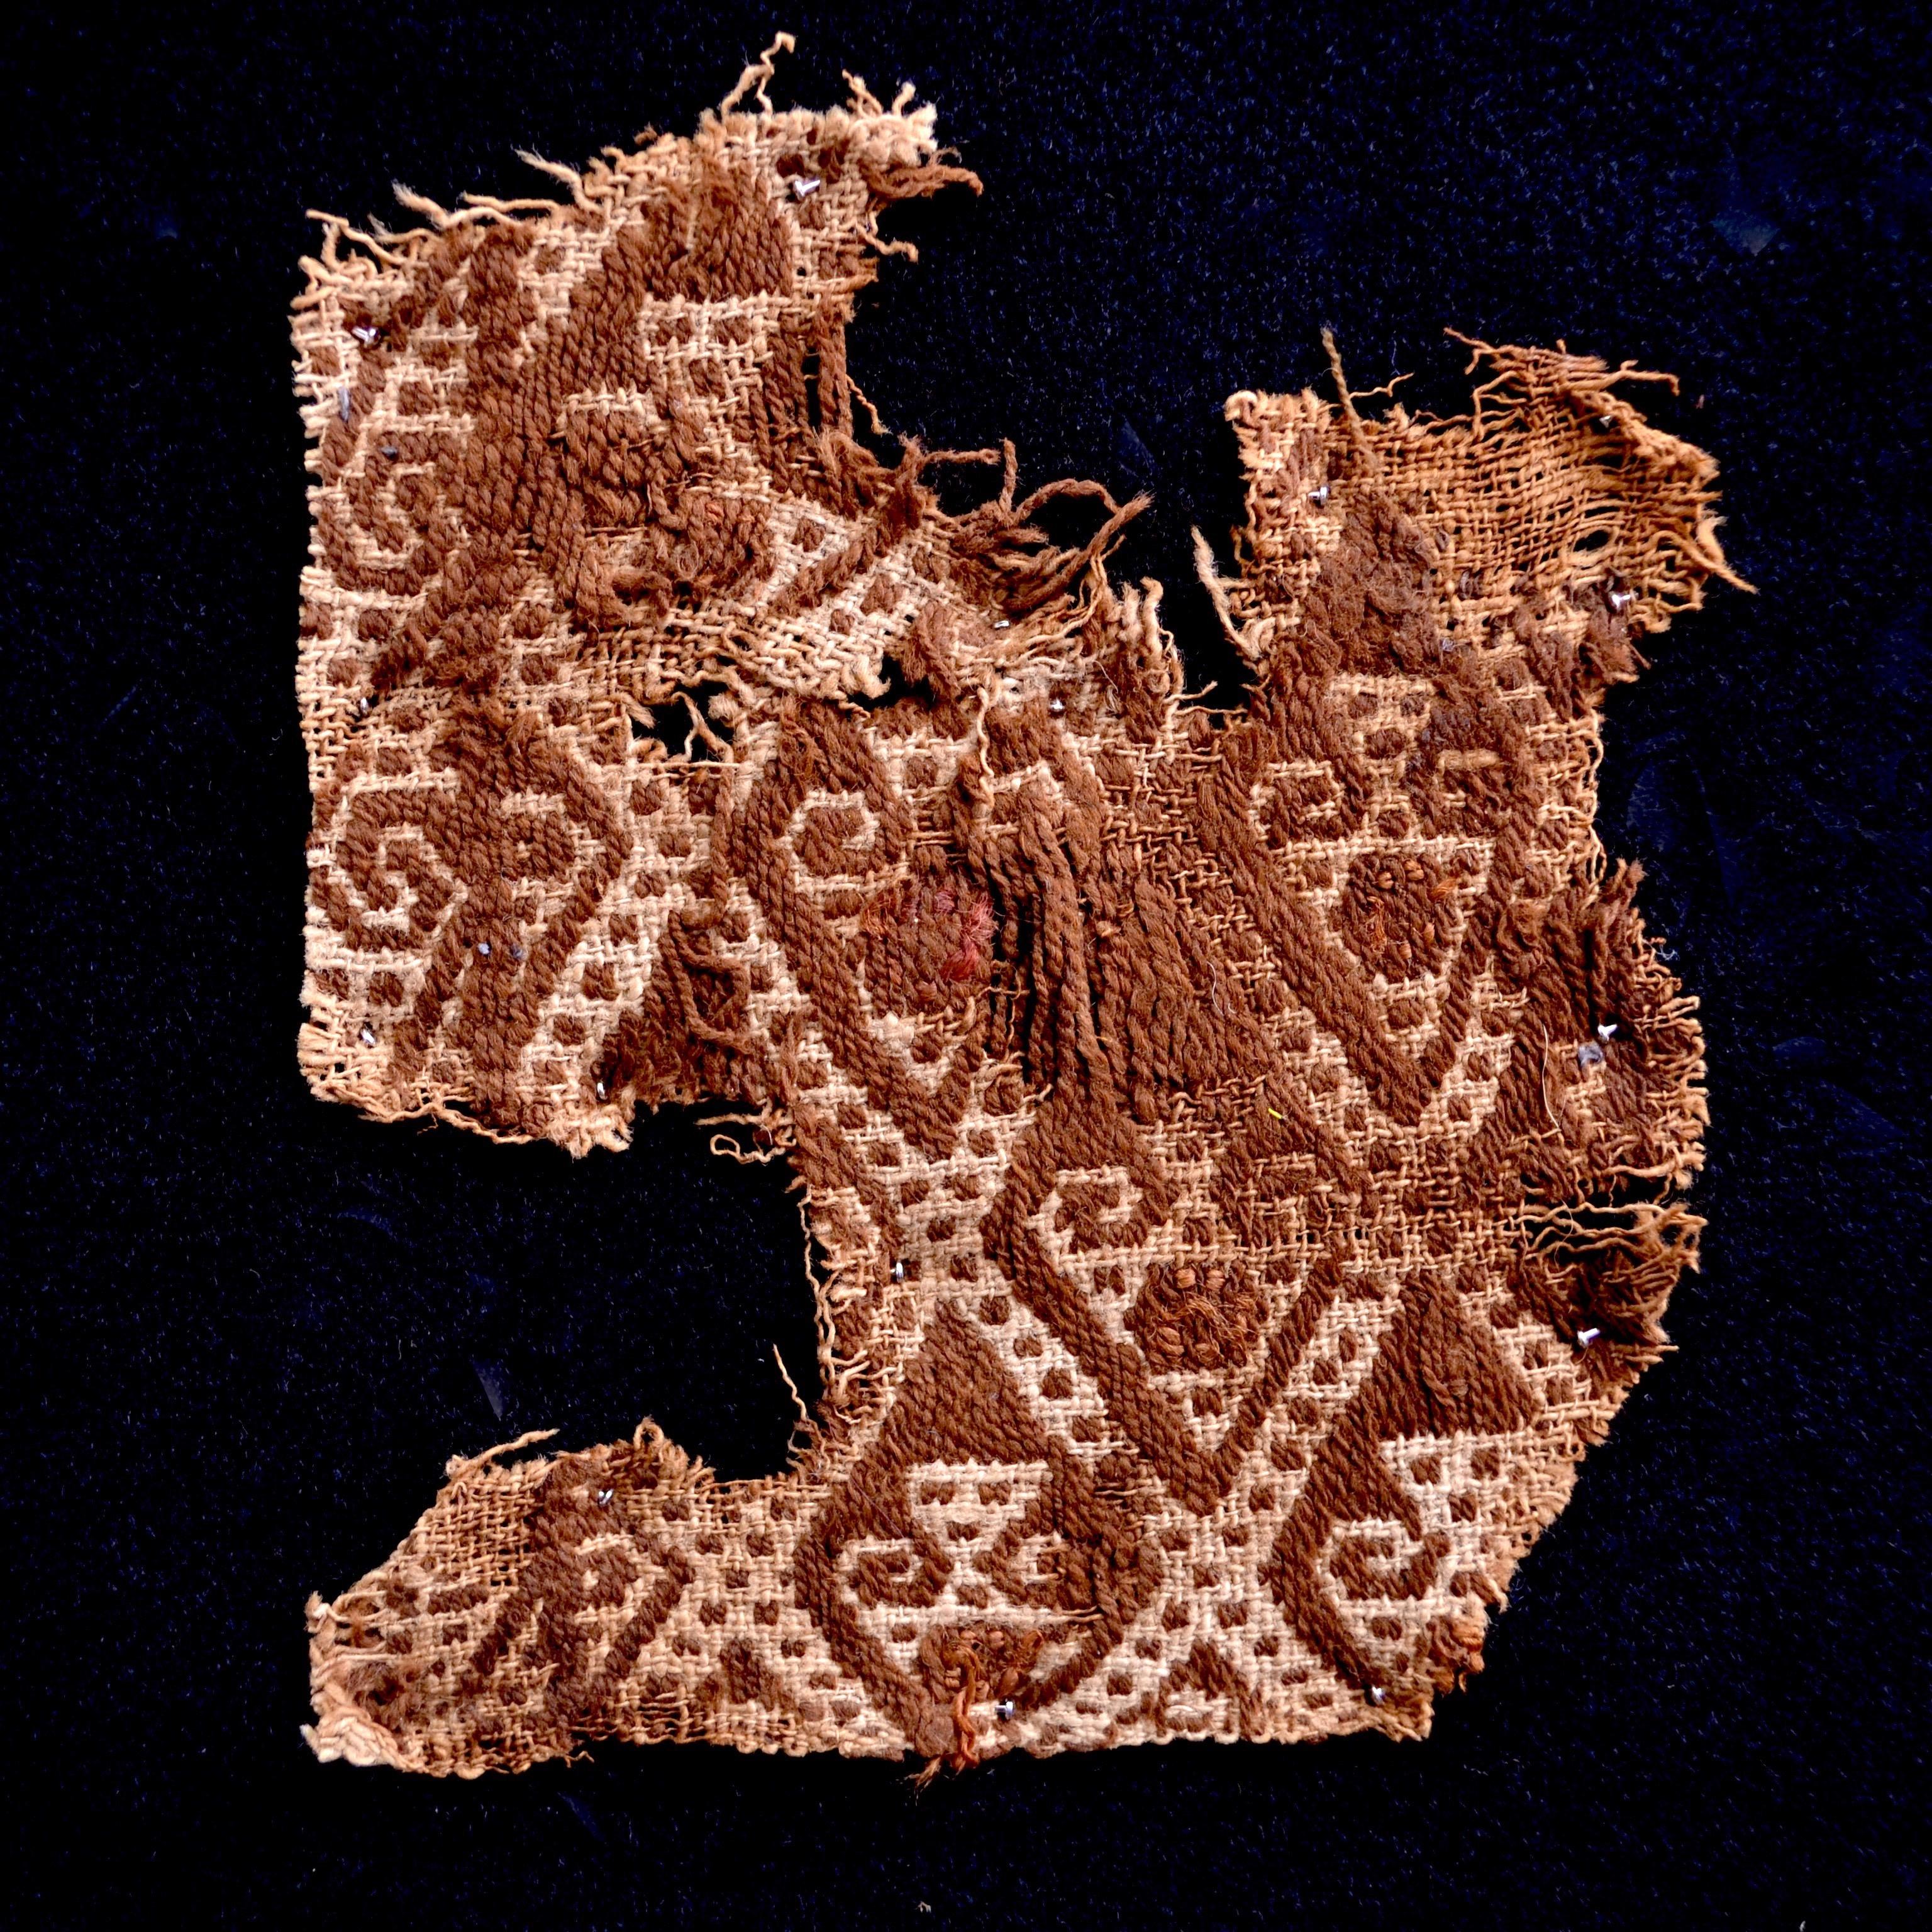 Earth tones pre-Columbian textile fragment with abstract embroidered figures. This piece is framed in a black shadowbox.

It is a wonder to behold antiquities such as a pre-Columbian textiles, an authentic piece of art that has been preserved for